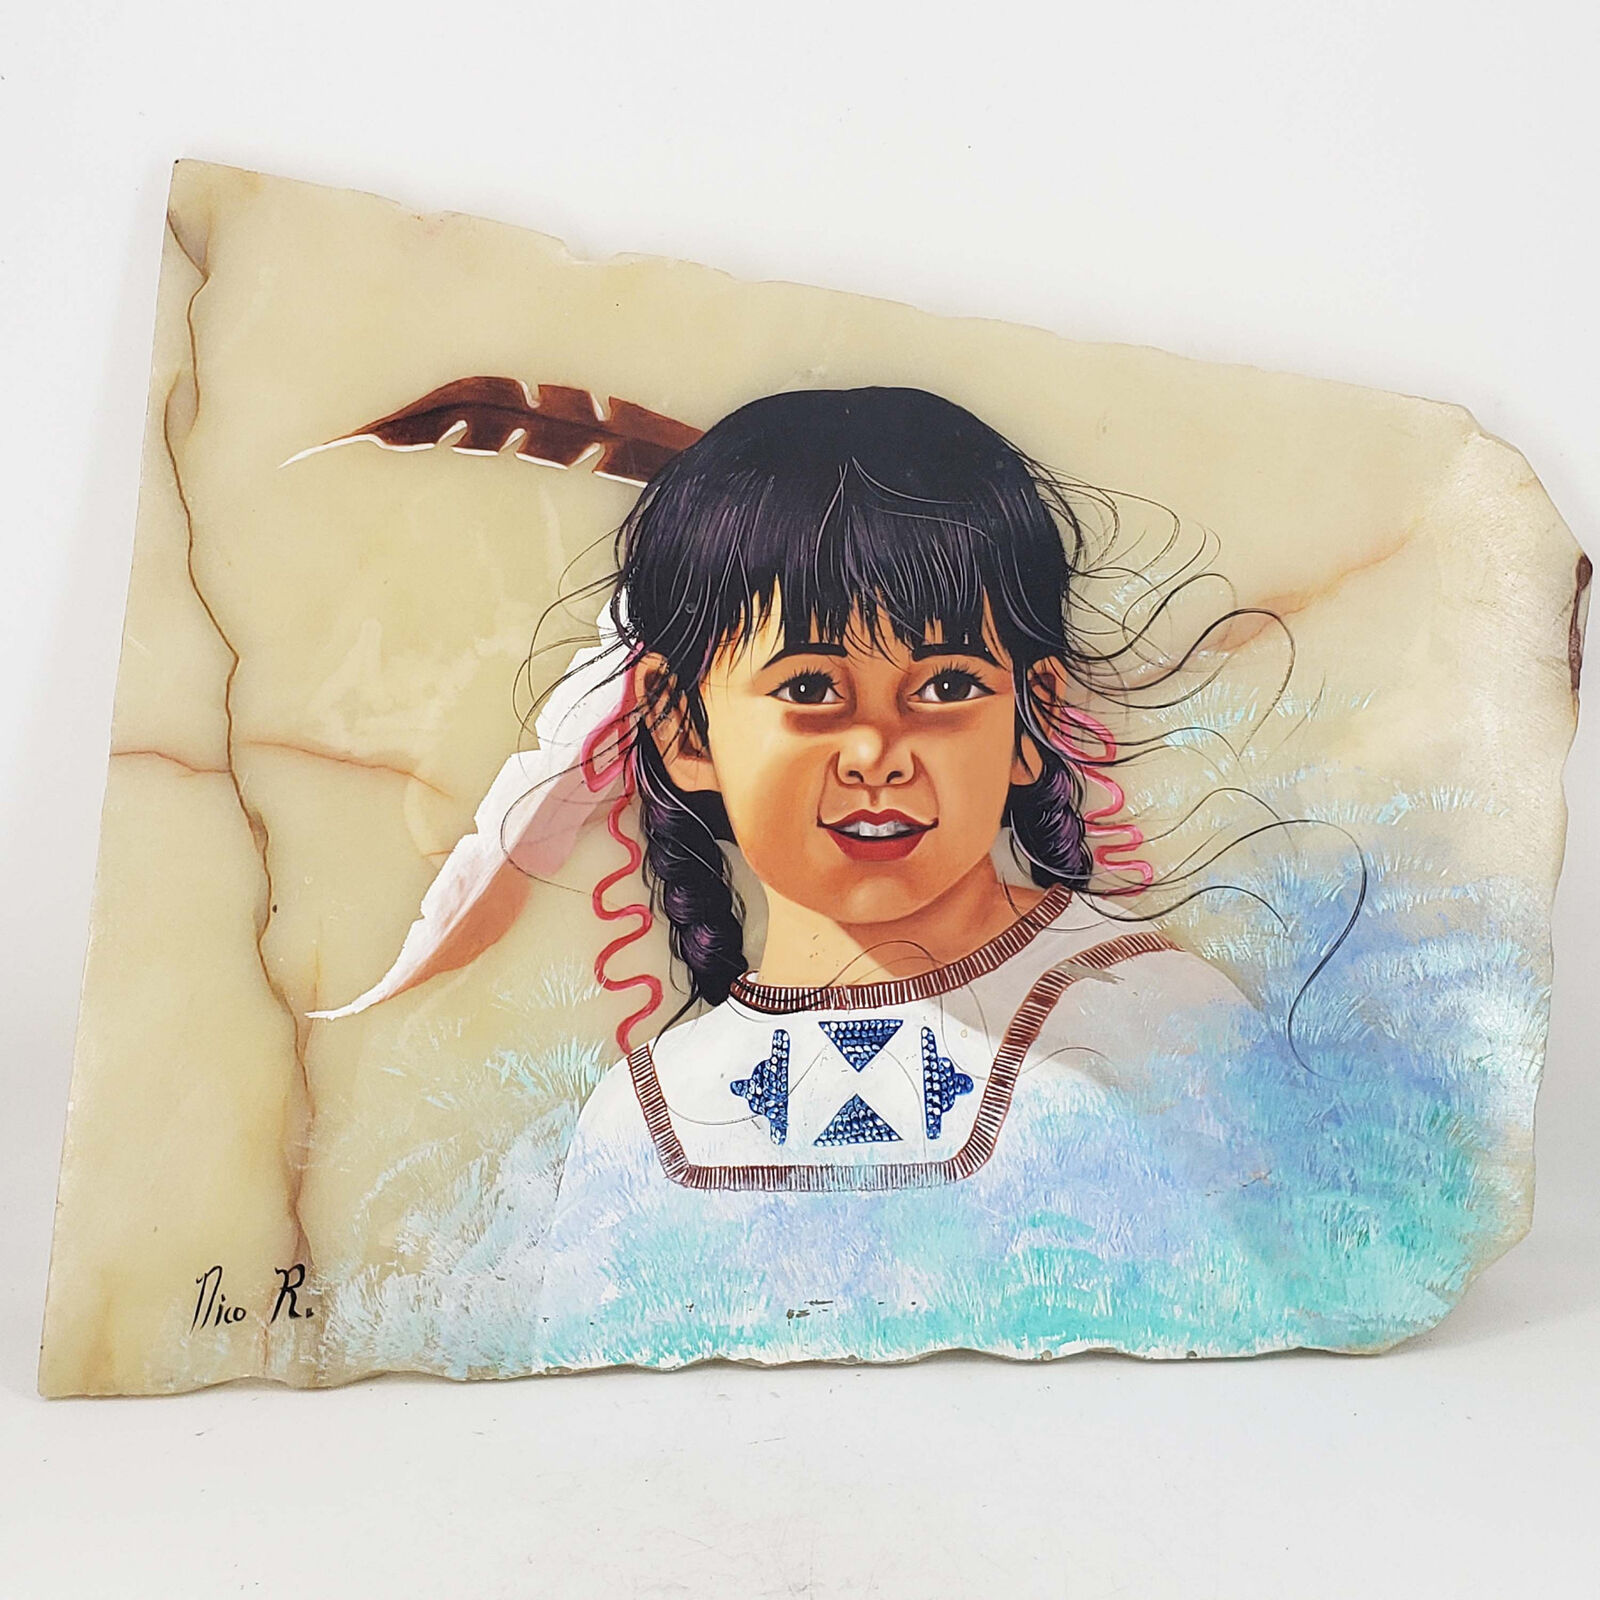 Native American Little Girl Child Oil Painting On Onyx Marble Slab Artist Signed